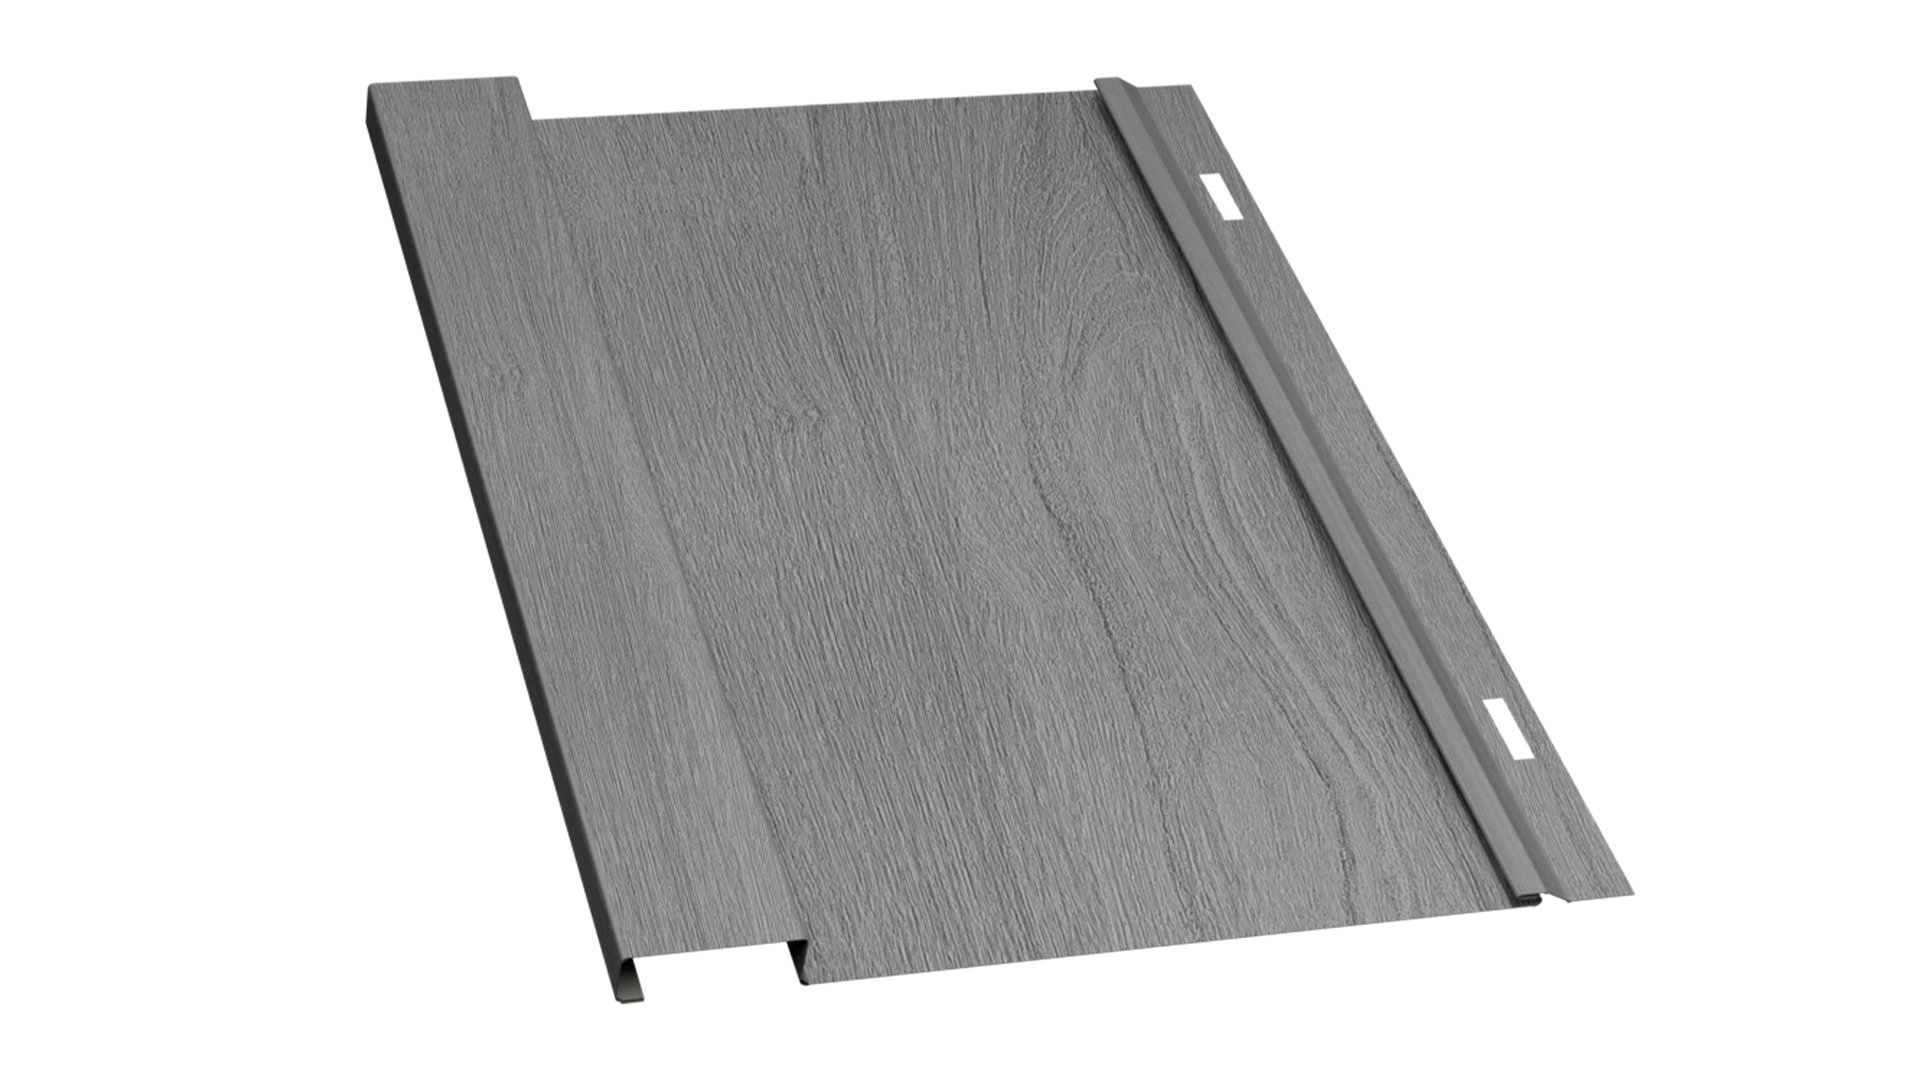 board-and-batten-panel-profile-gray-wood